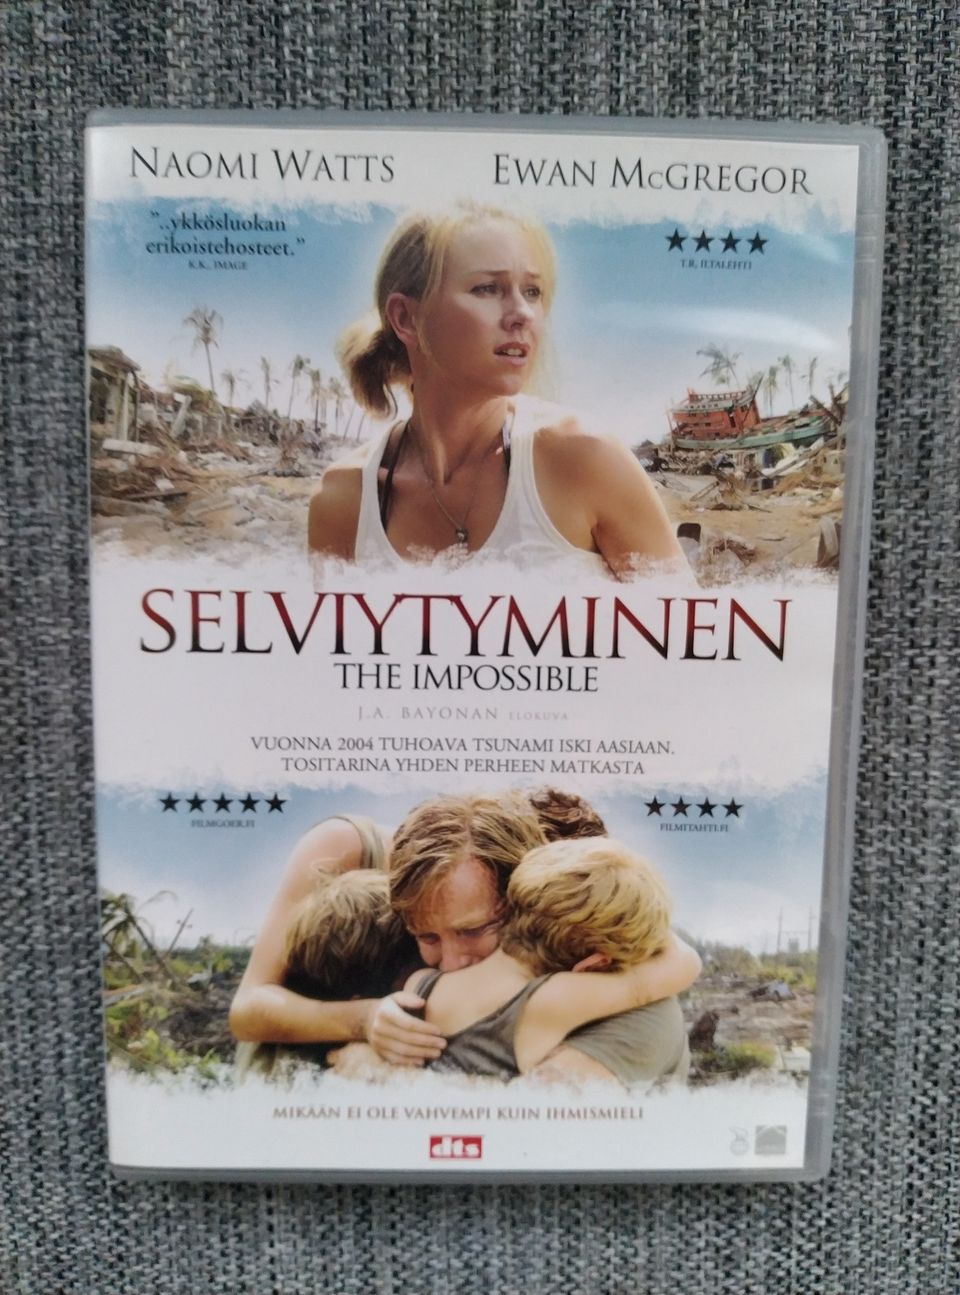 Selviytyminen - The Impossible dvd